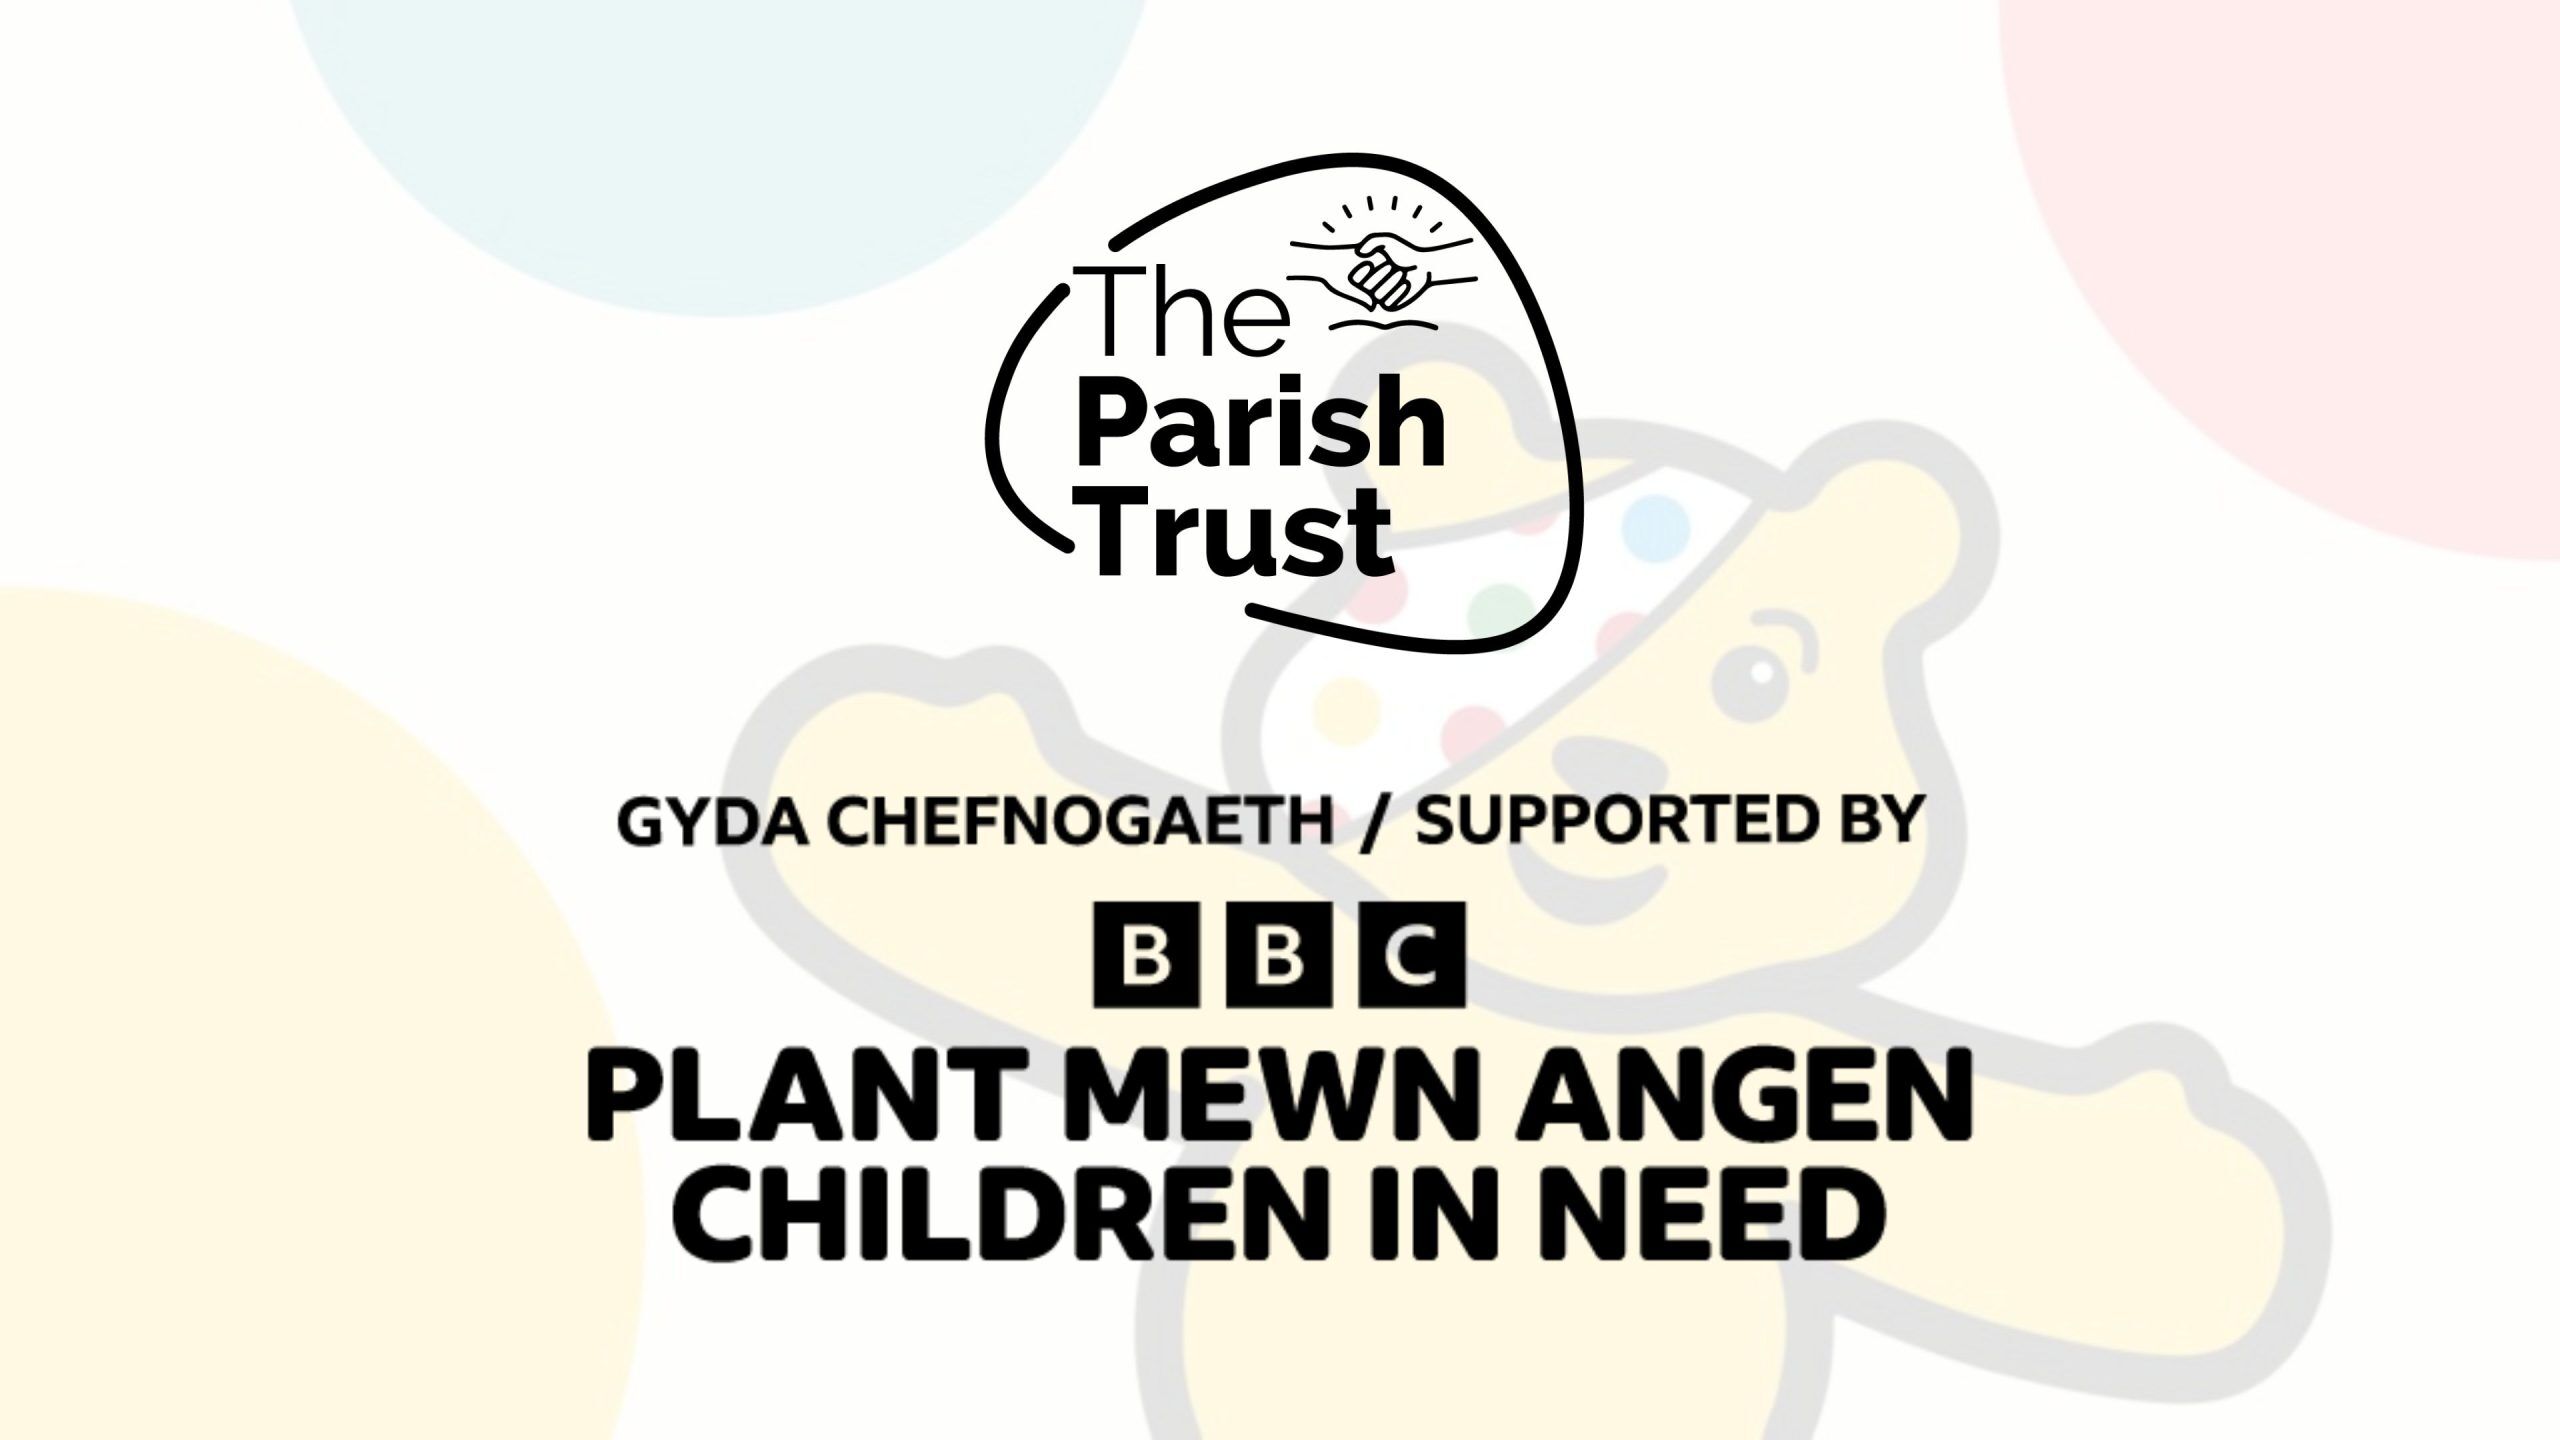 Children in Need award The Parish Trust £90,000 in three-year transformative grant for children and young people